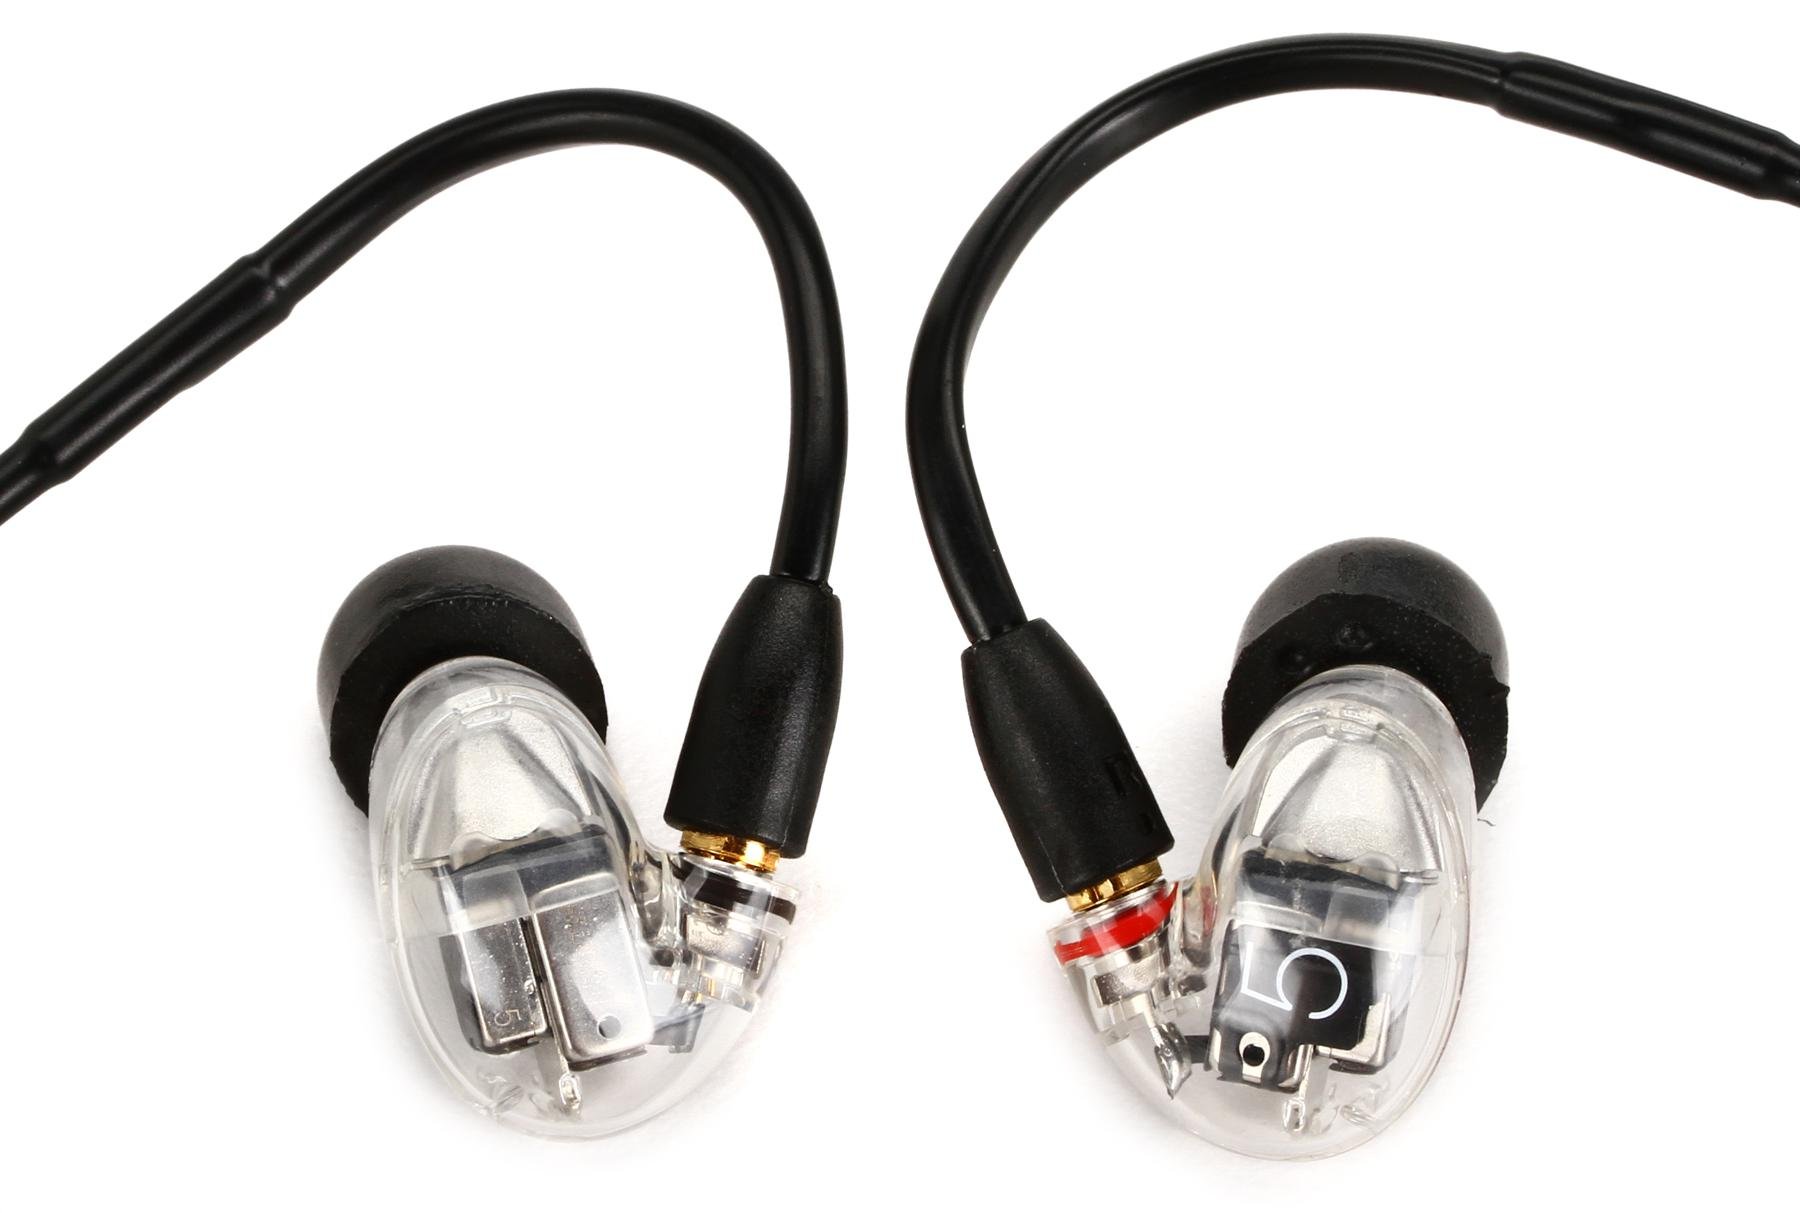 Shure AONIC 5 Sound Isolating Earphones - Clear | Sweetwater